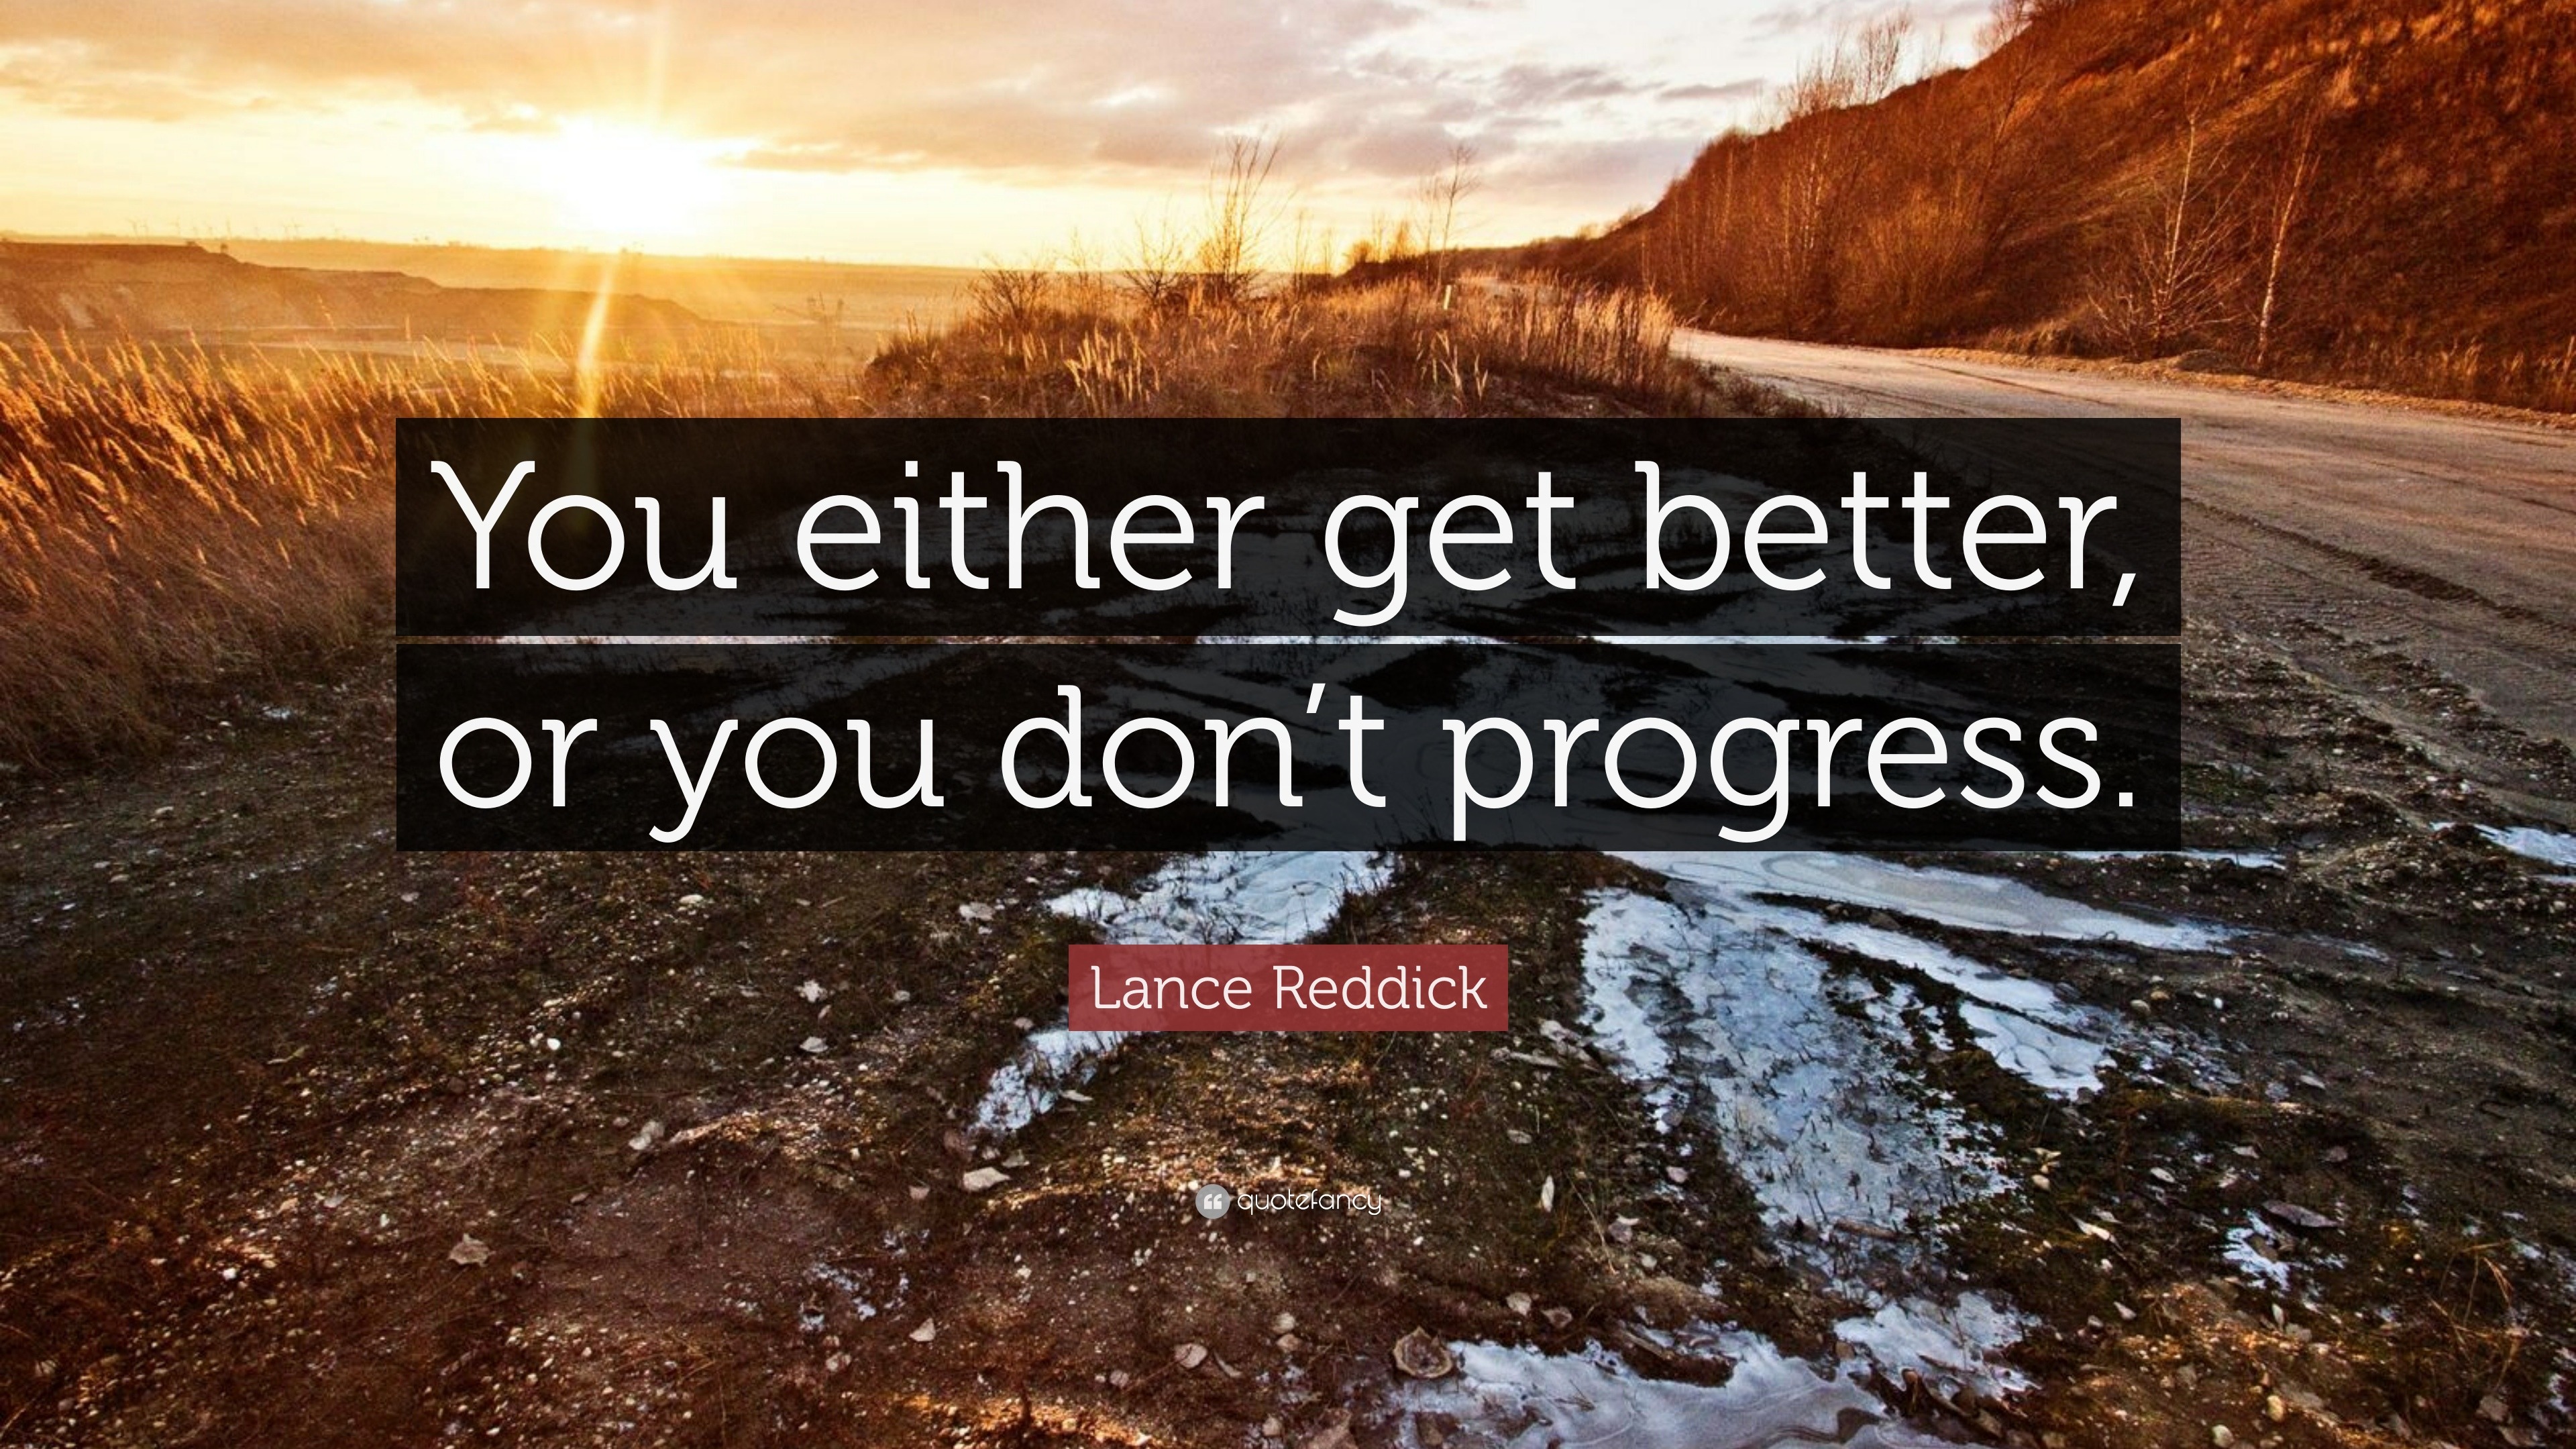 Lance Reddick Quote: “You either get better, or you don’t progress.”